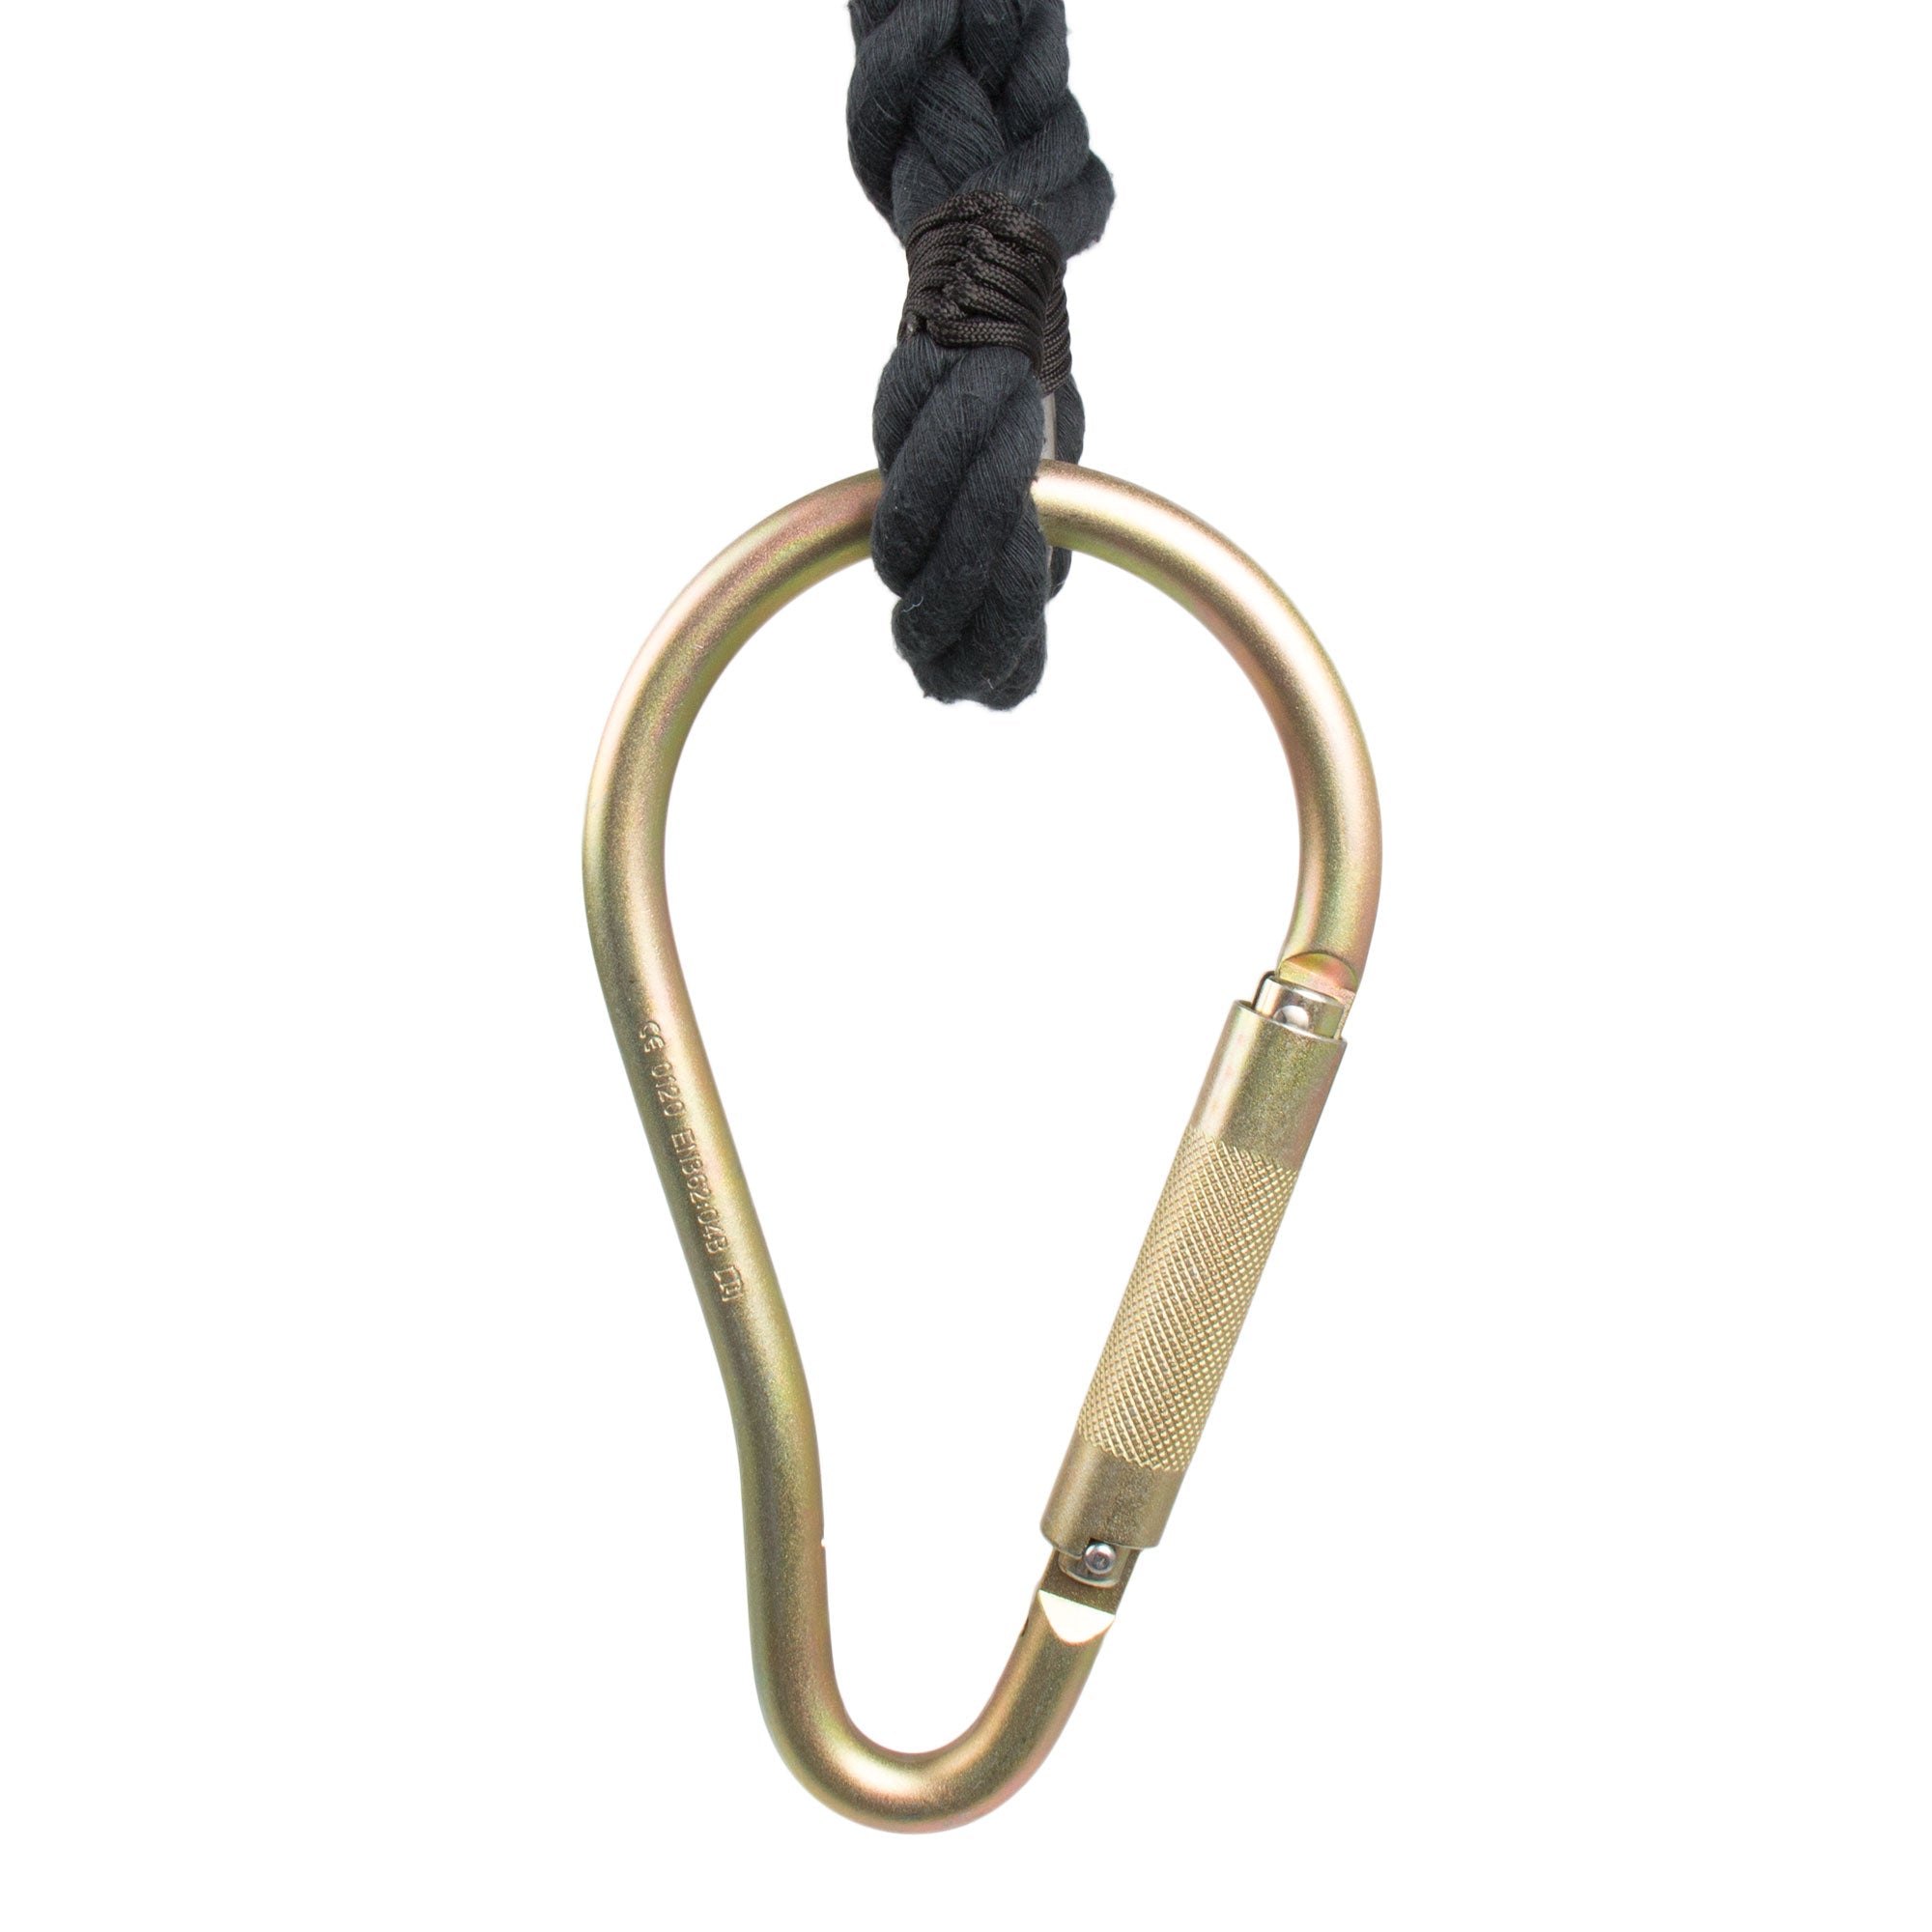 Large pear shaped carabiner attached to a rope